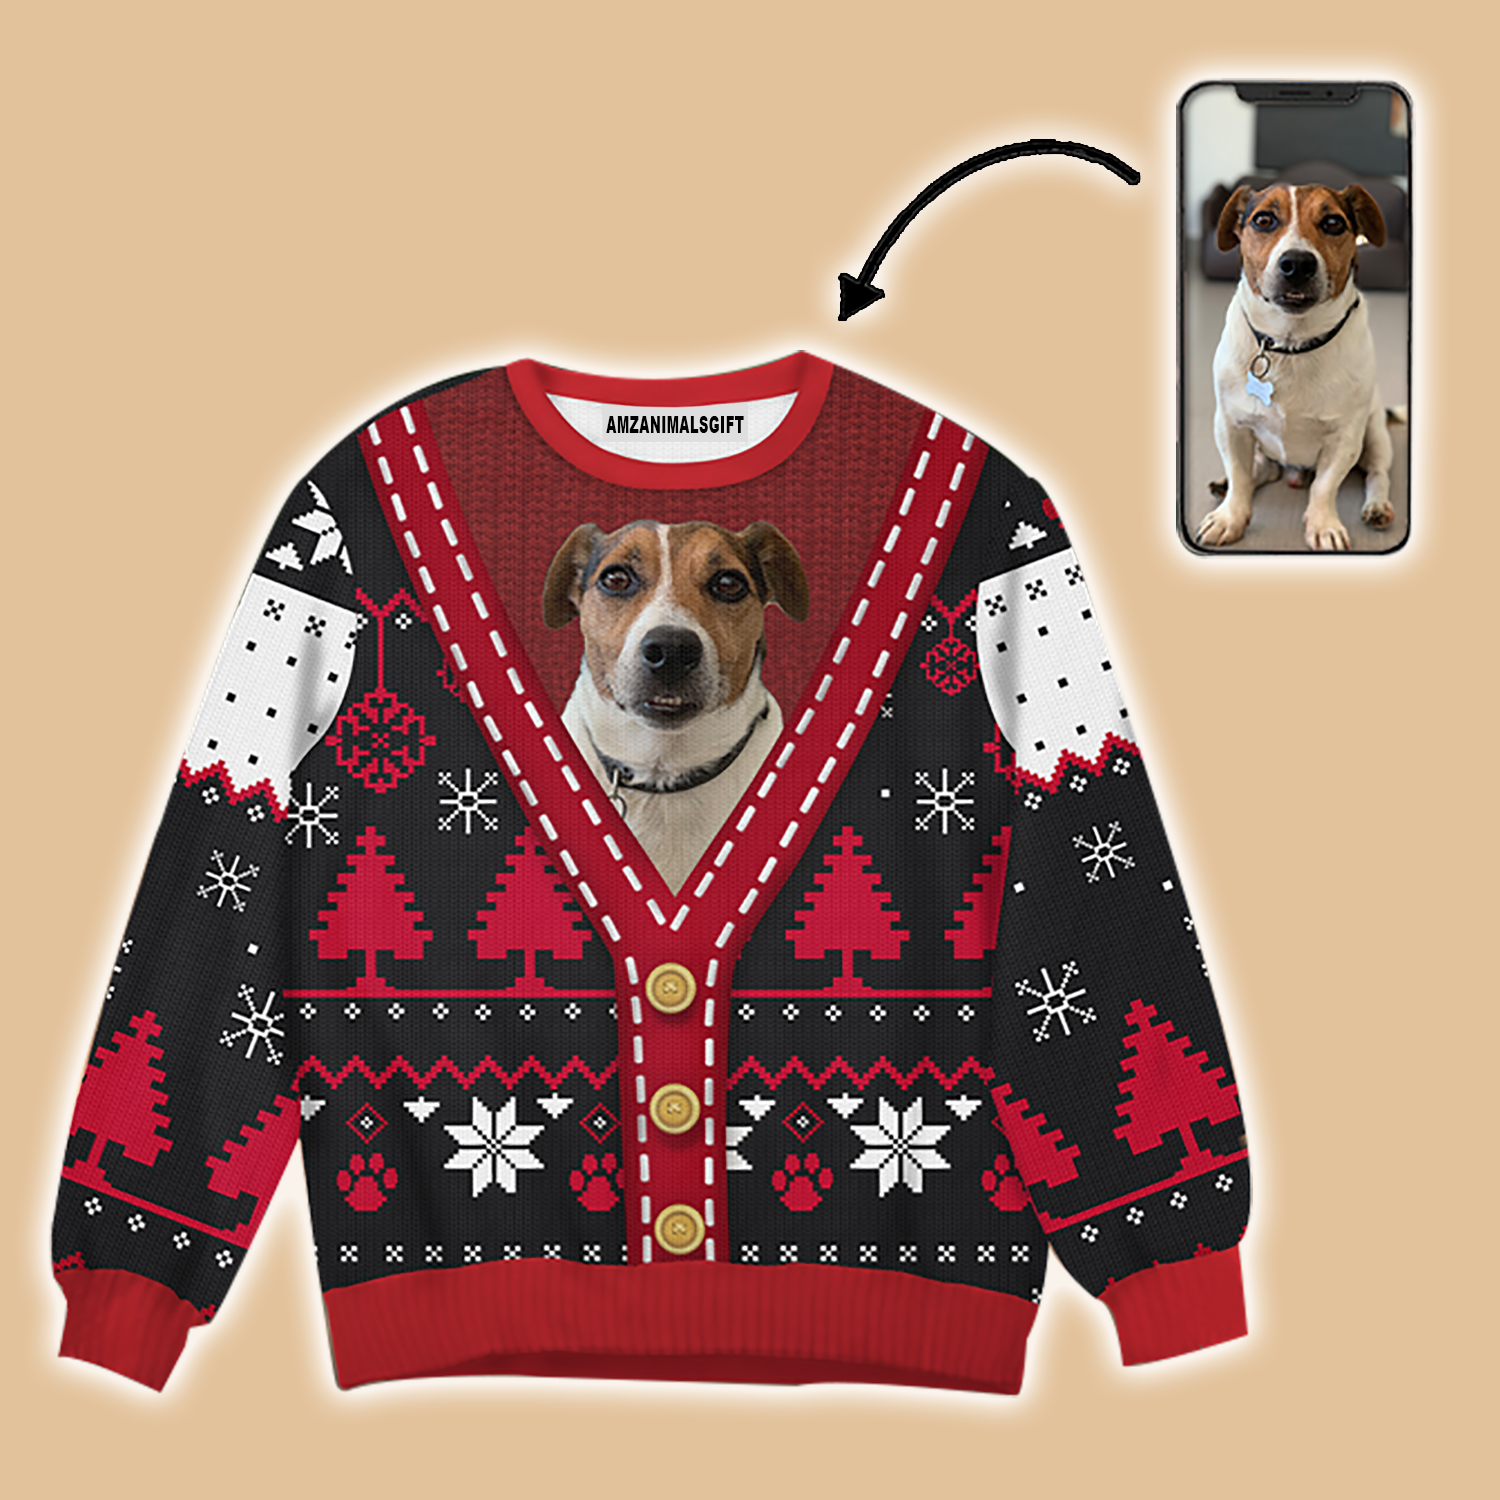 Dog Cat Pet Ugly Christmas Sweater Customized Photo Outfit For Men Women Pet Dog Cat Lovers On Christmas, New Year, Autumn, Winter